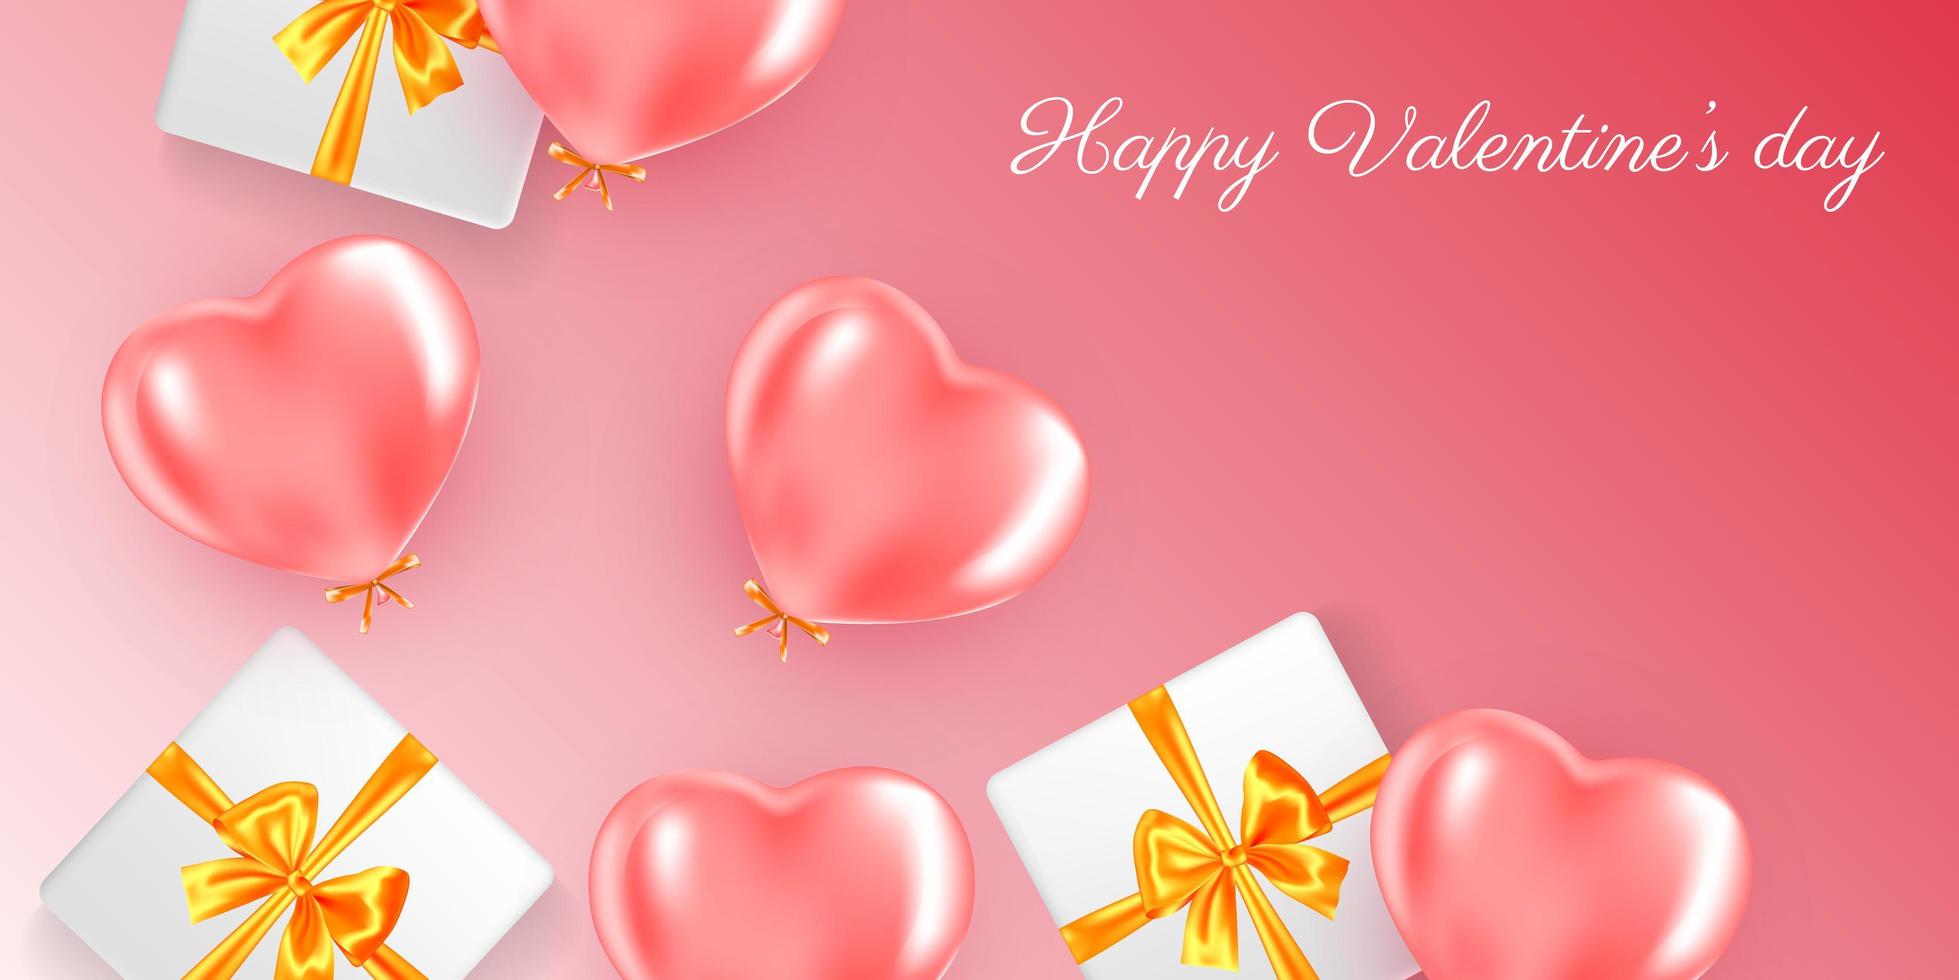 Valentine's day card concept. Romantic background. vector